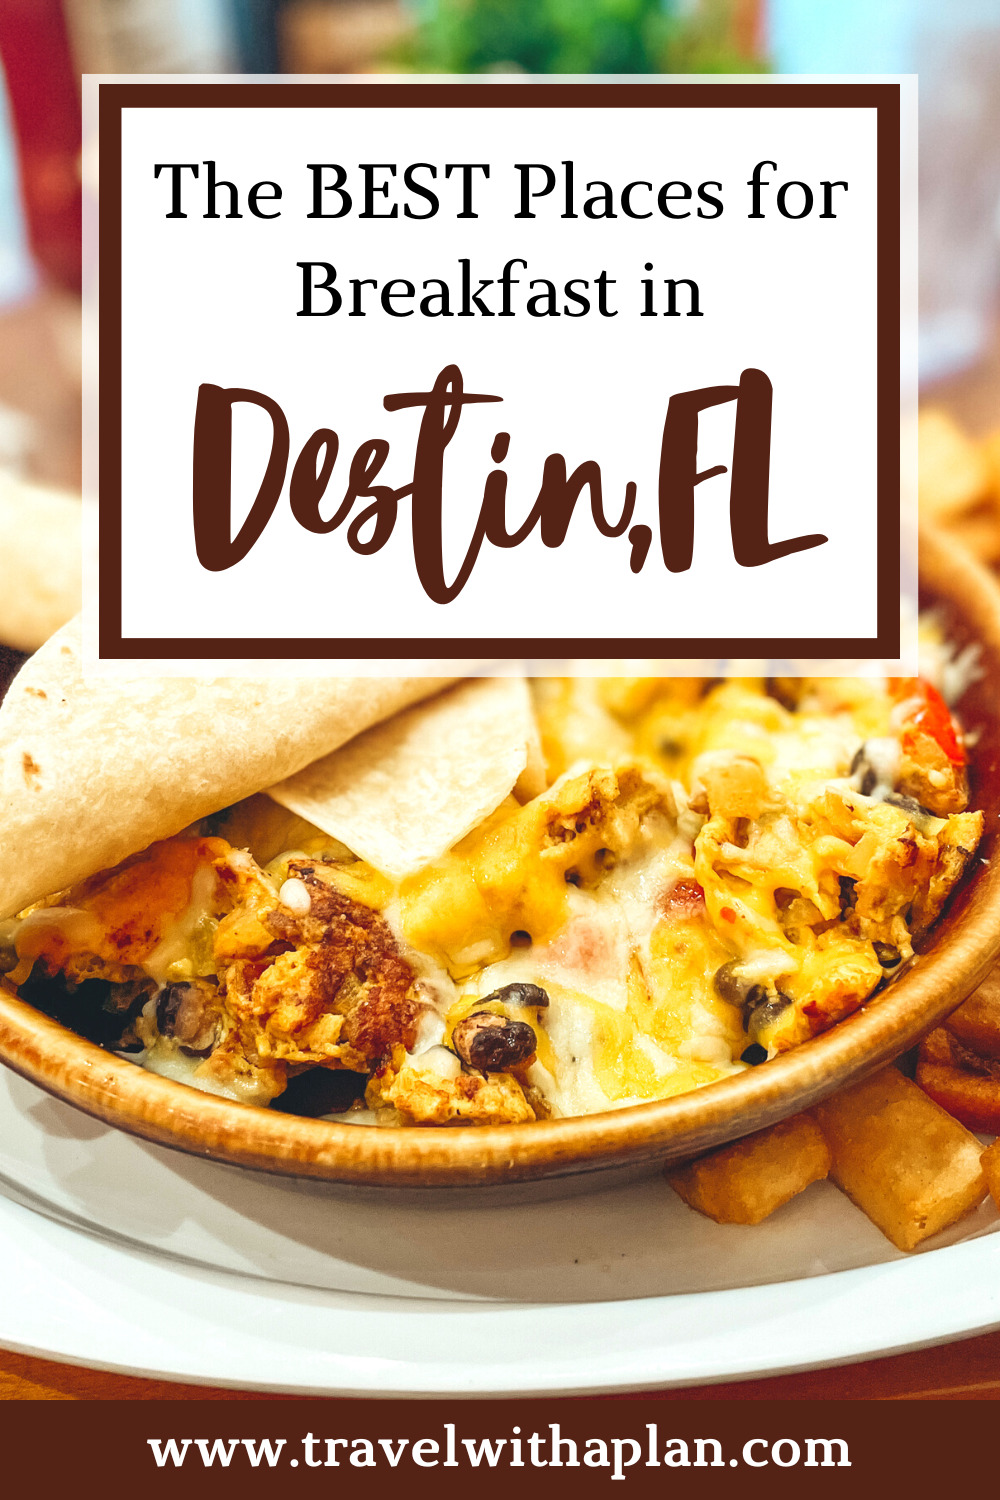 Check out our list of the best breakast in Destin, FL!  These Destin restaurants serve up amazing food and have a fun, relaxing atmosphere.  Start planning your breakfast in Destin now!  #floridavacation #DestinFL #Destinrestaurants